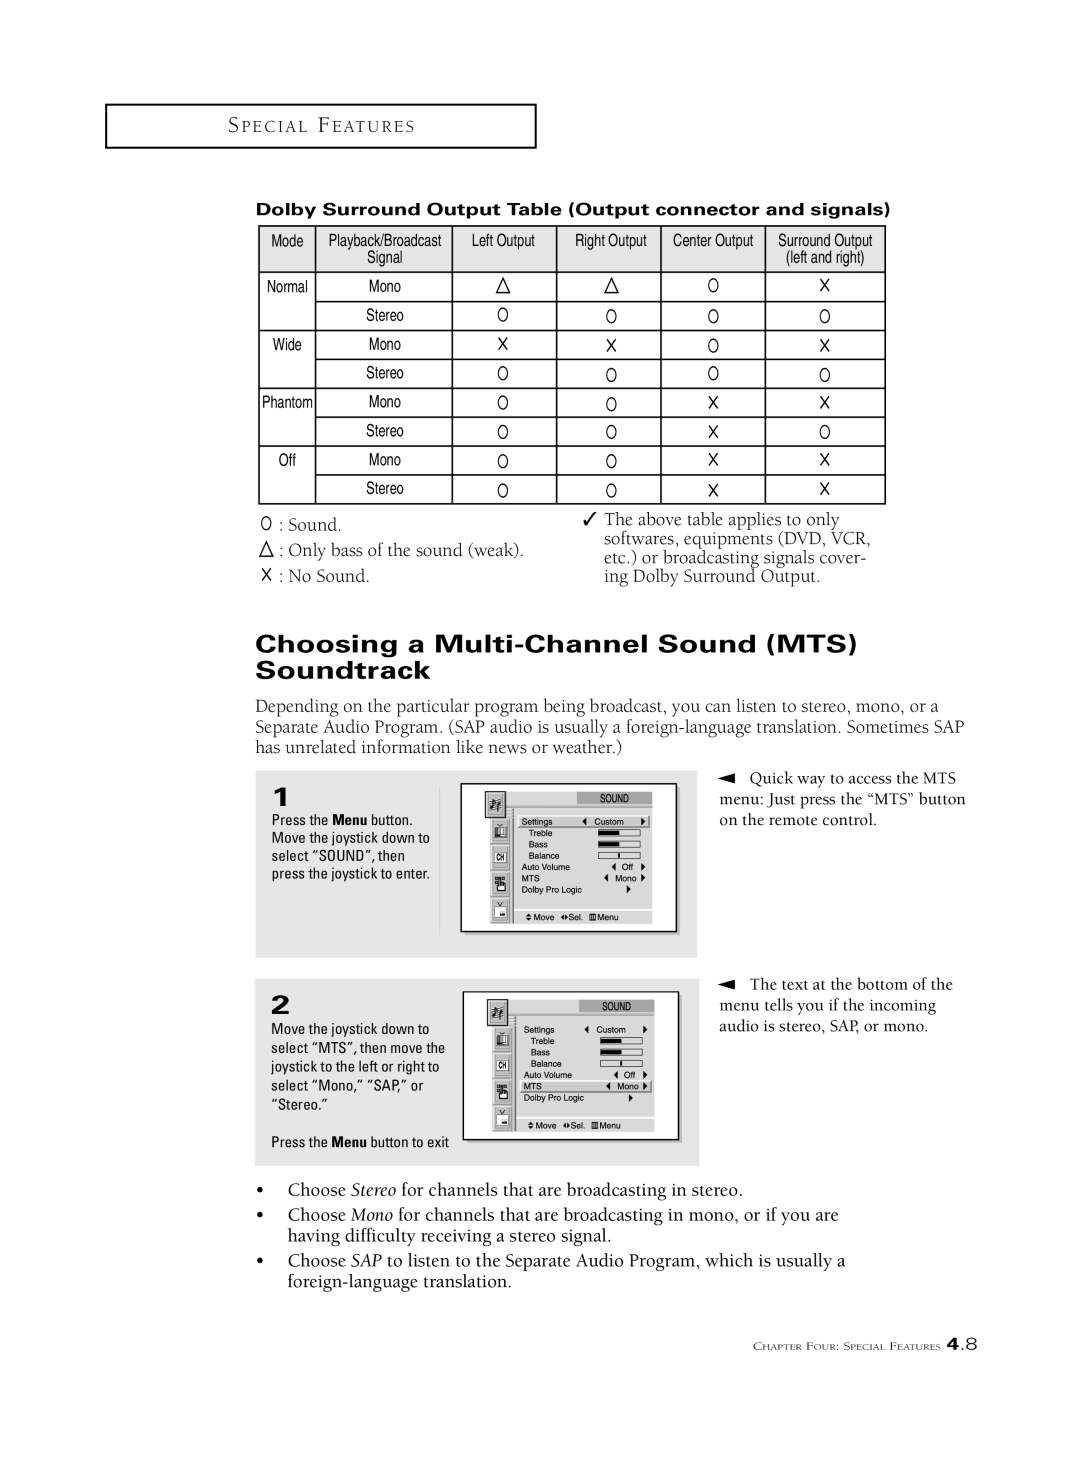 Samsung HCL 652W, HCM6525W, HCL 473W, HCL 552W, HCL 6515W, HCM653W, HCM 553W manual Choosing a Multi-Channel Sound MTS Soundtrack 